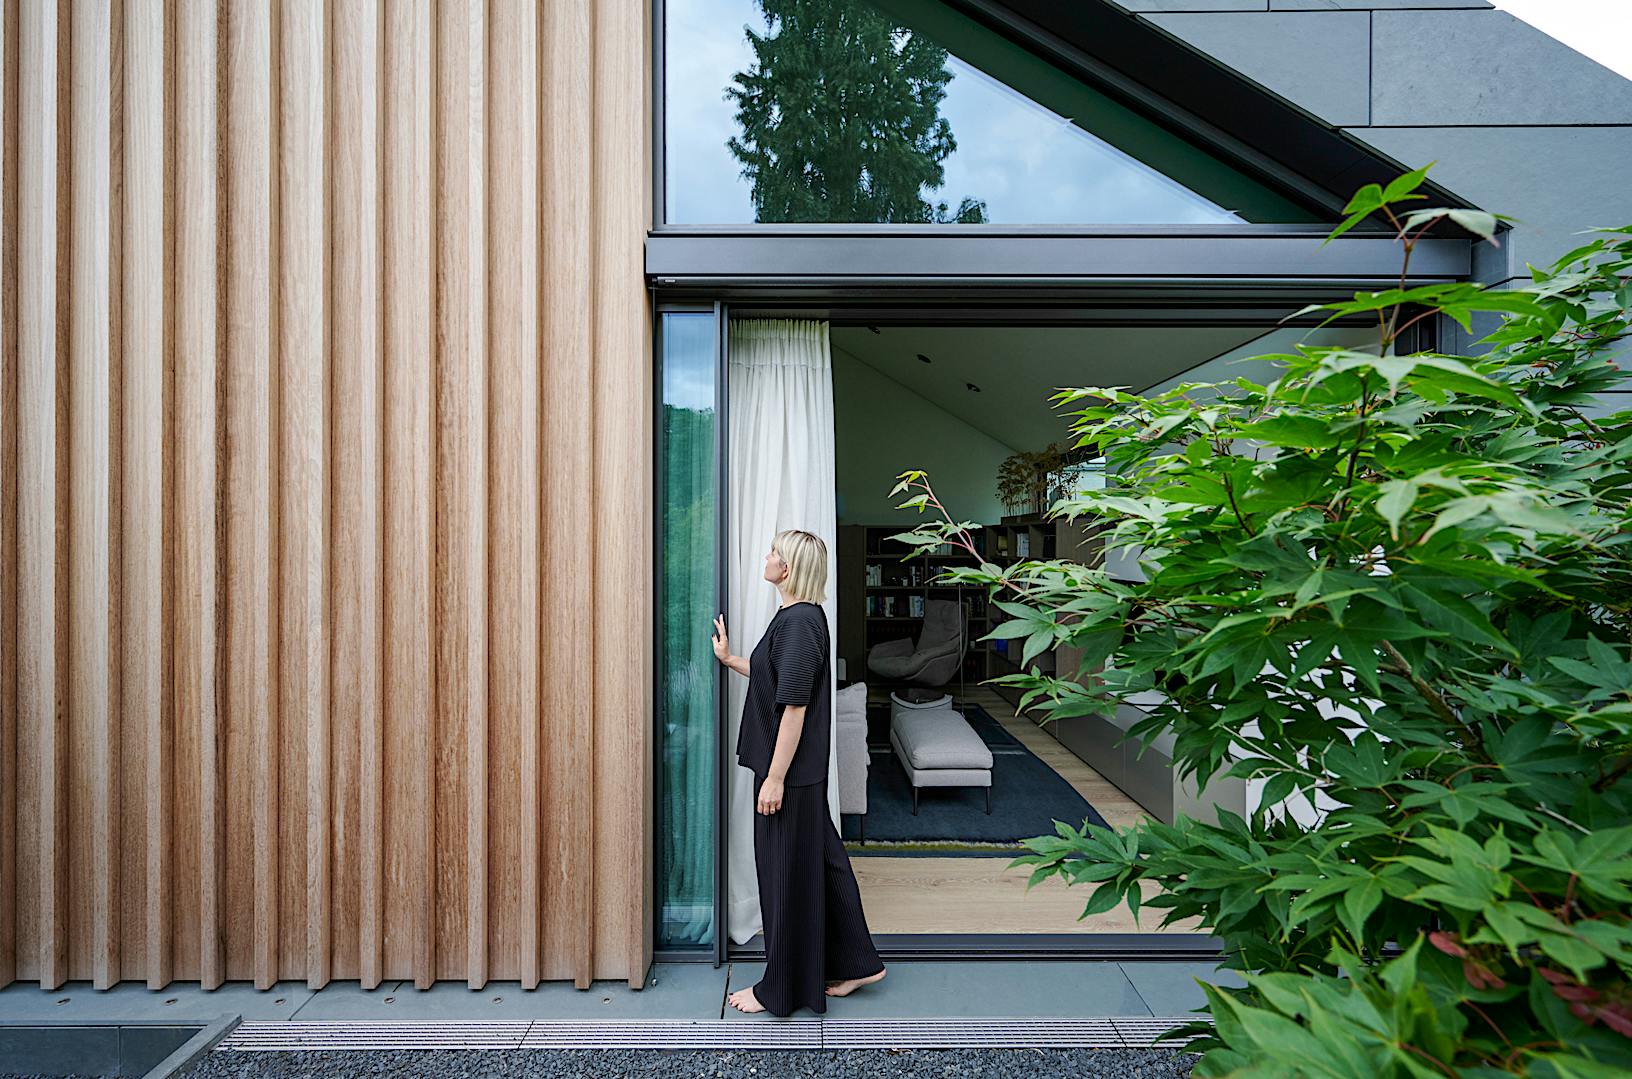 A woman is standing outside of a modern house with sliding glass walls